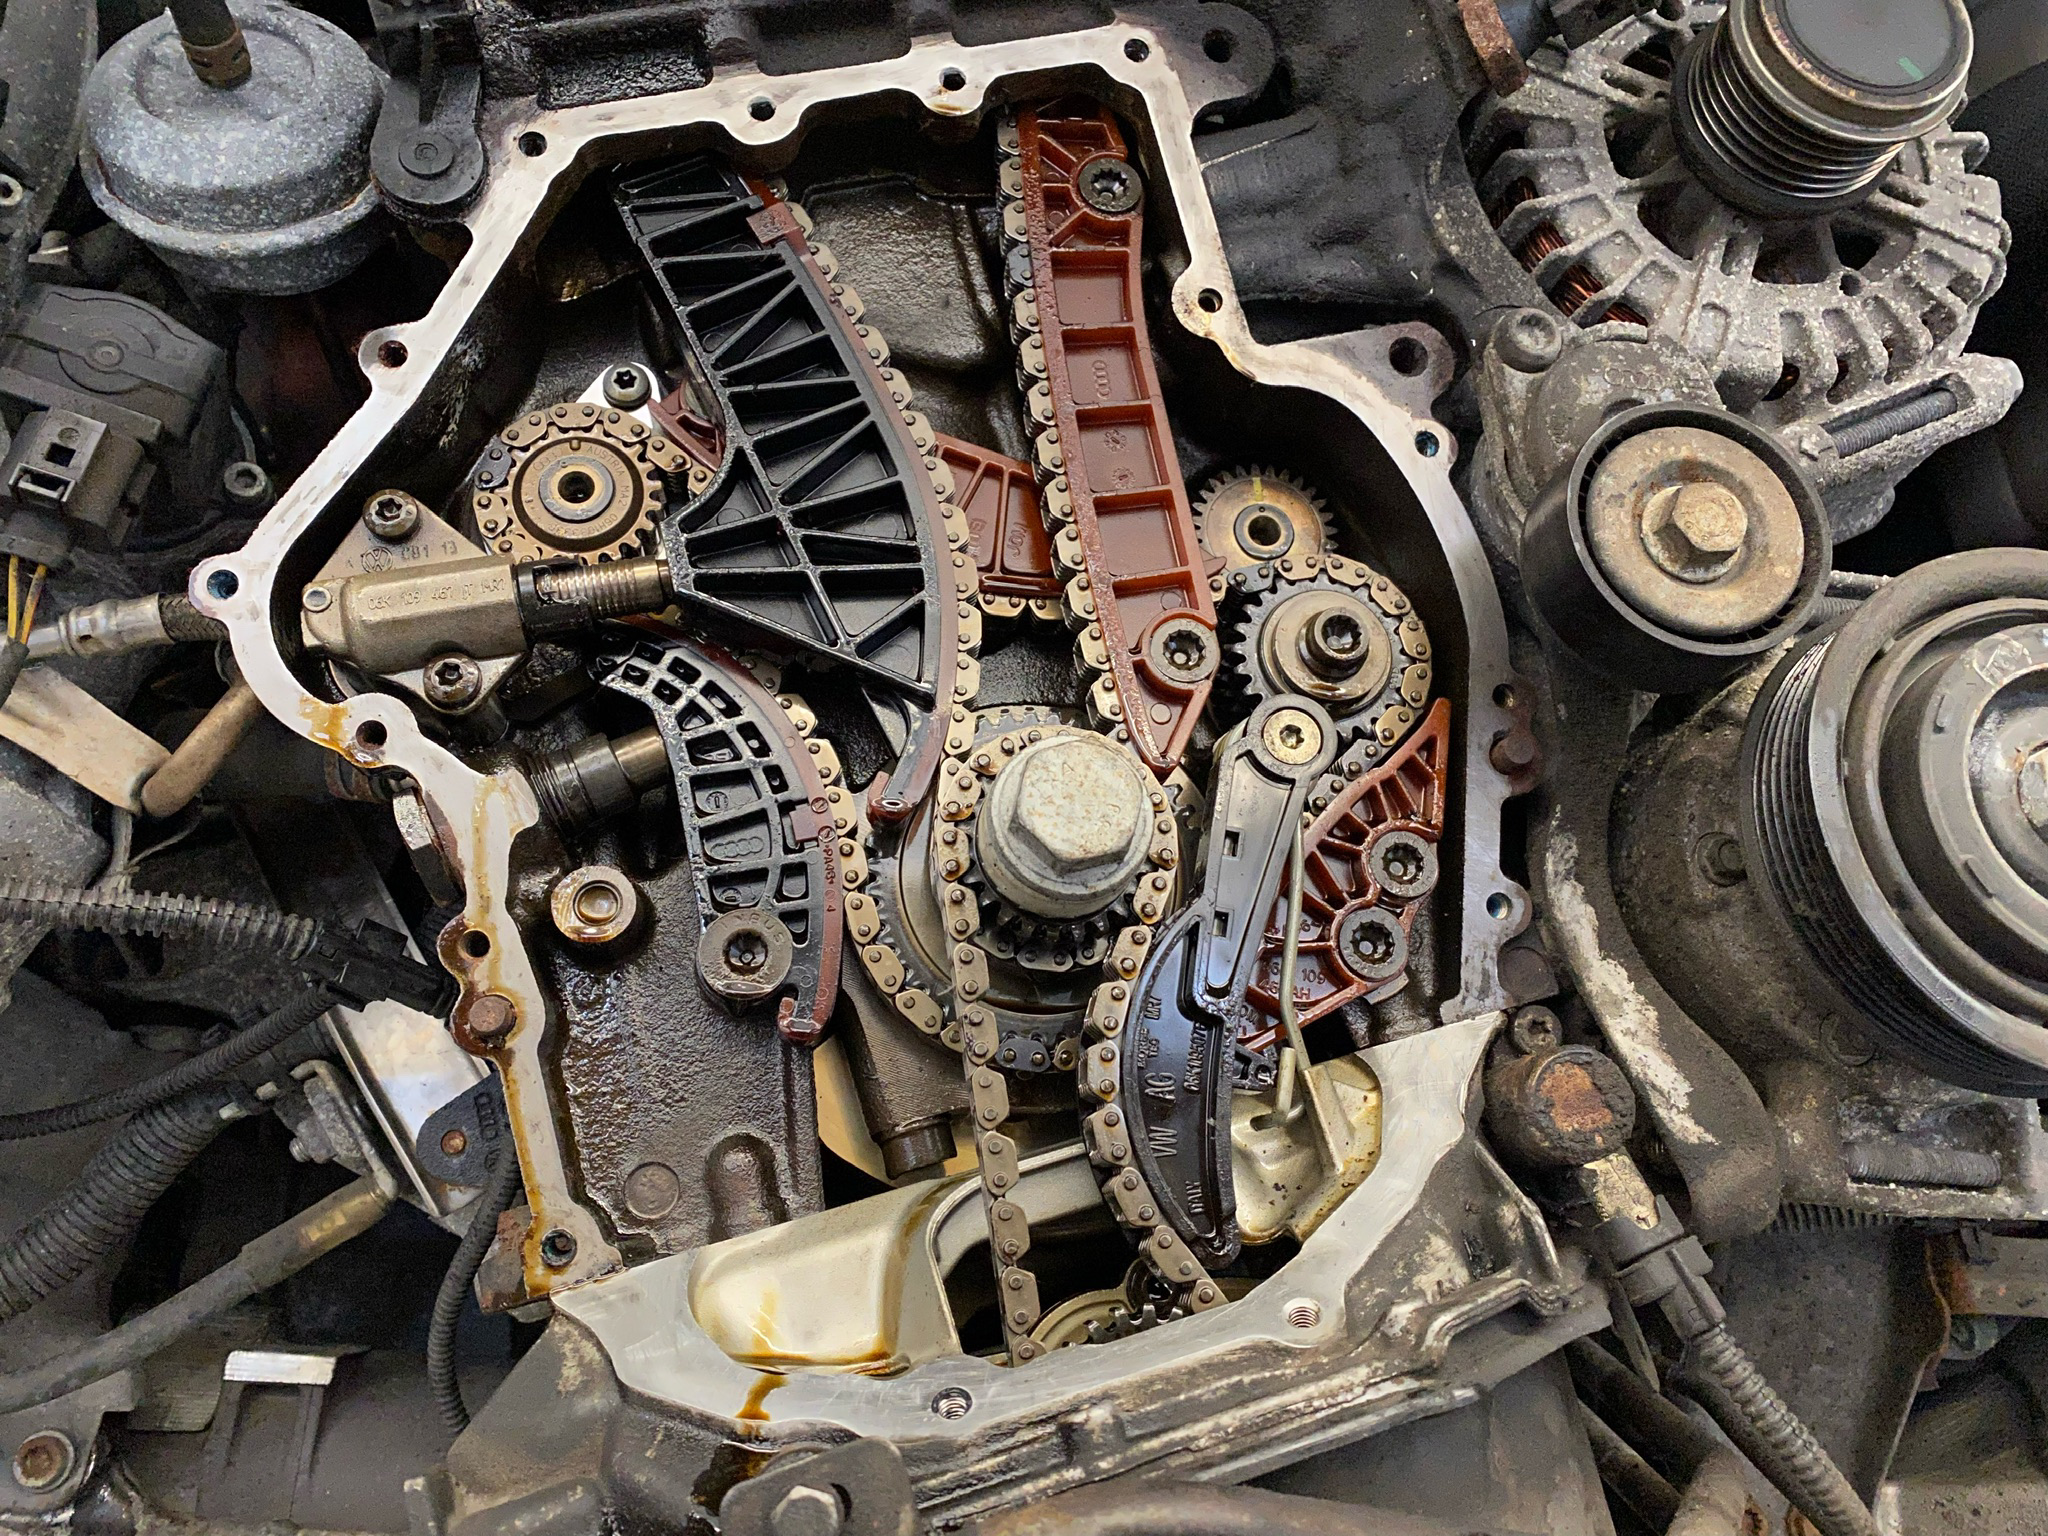 Stretched Timing Chain On Audi Volkswagen 2.0